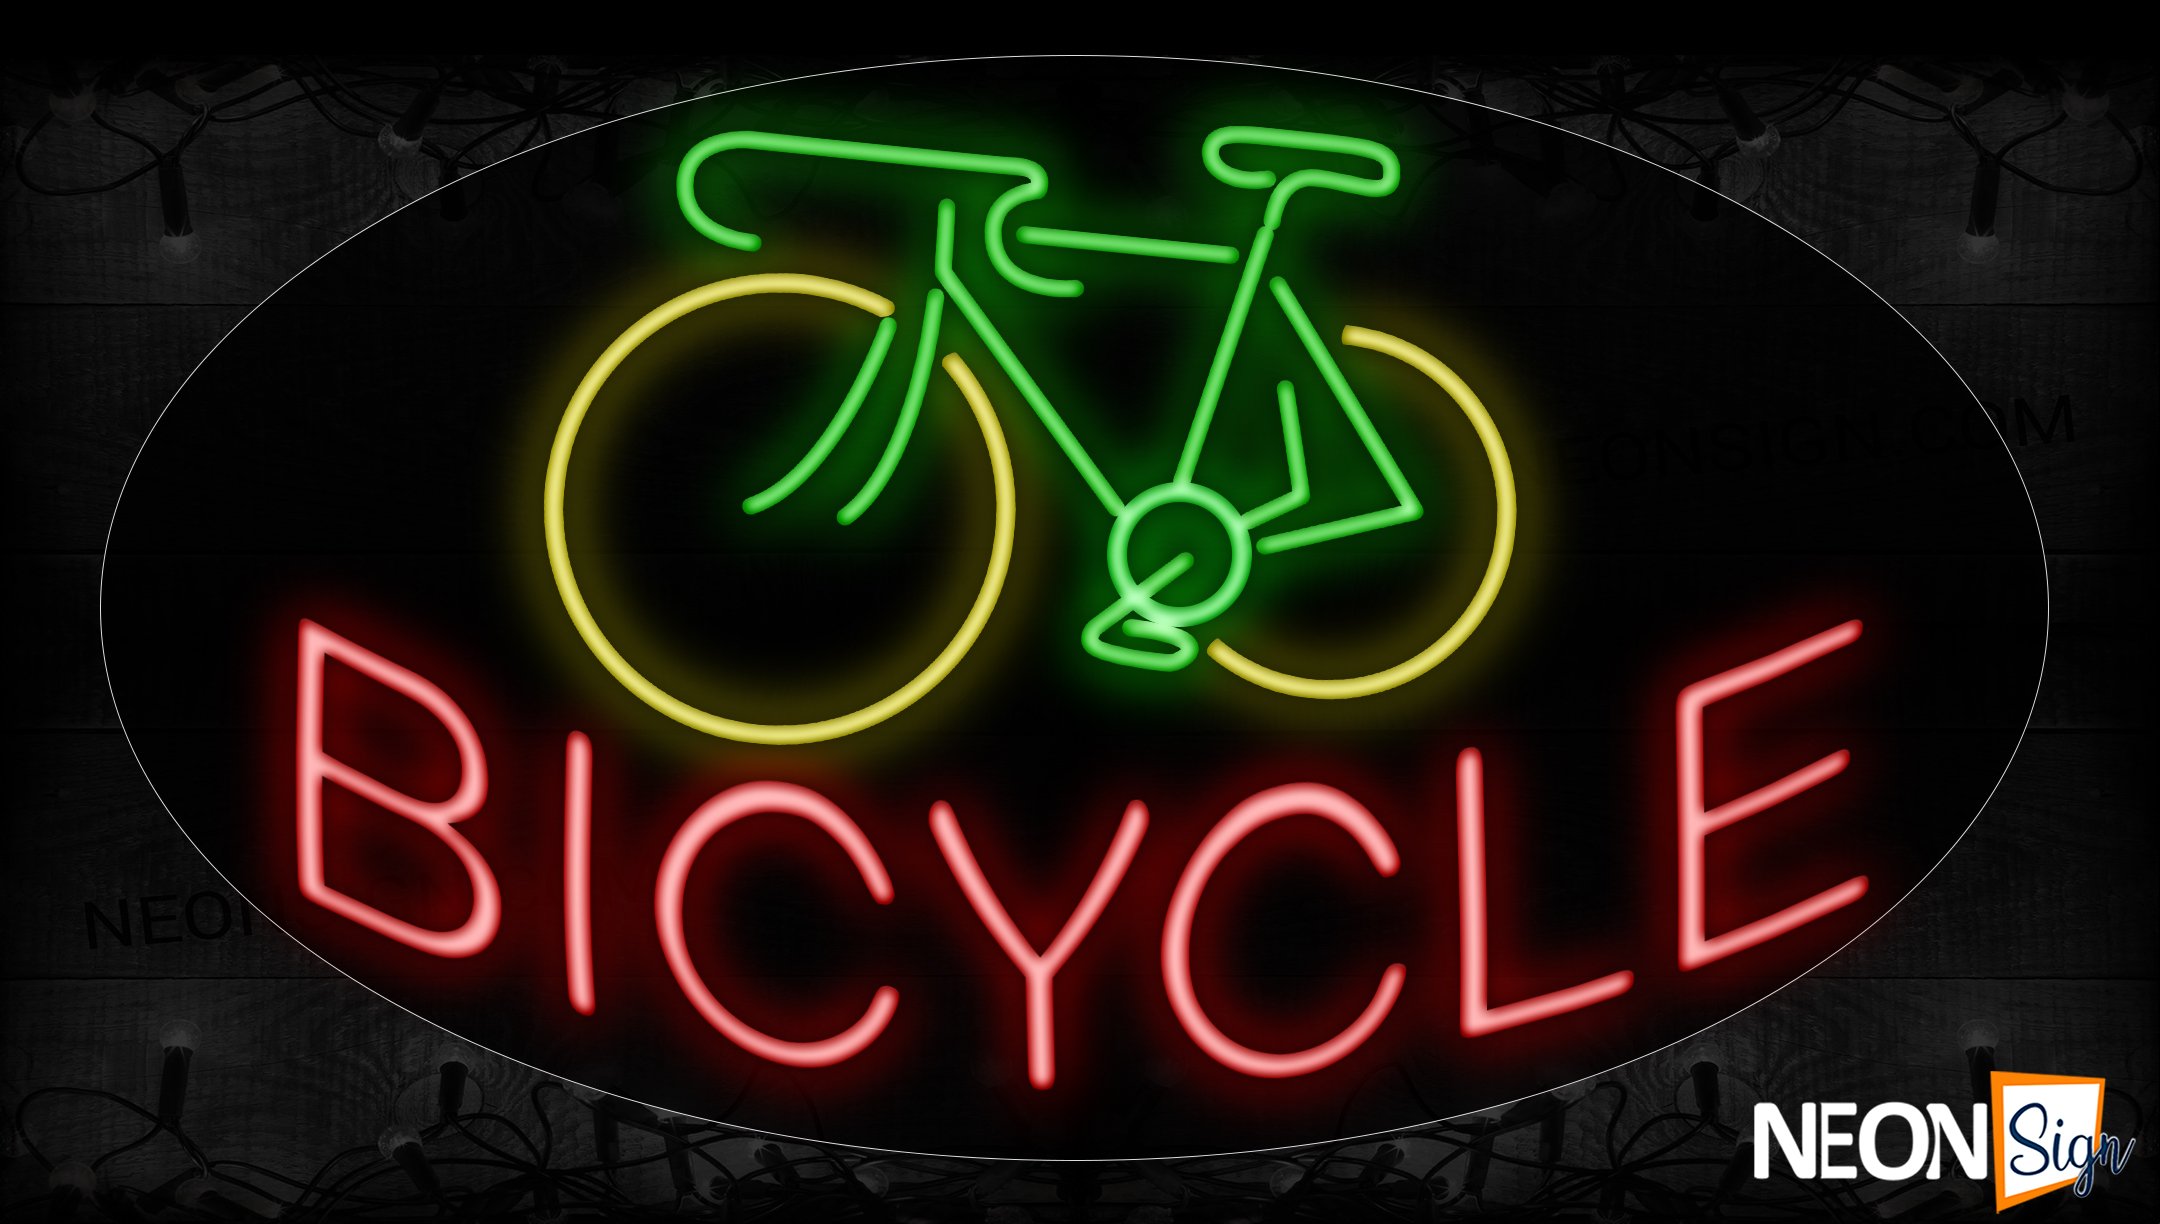 Image of 14324 Bicycle With Logo Neon Signs_17x30 Contoured Black Backing